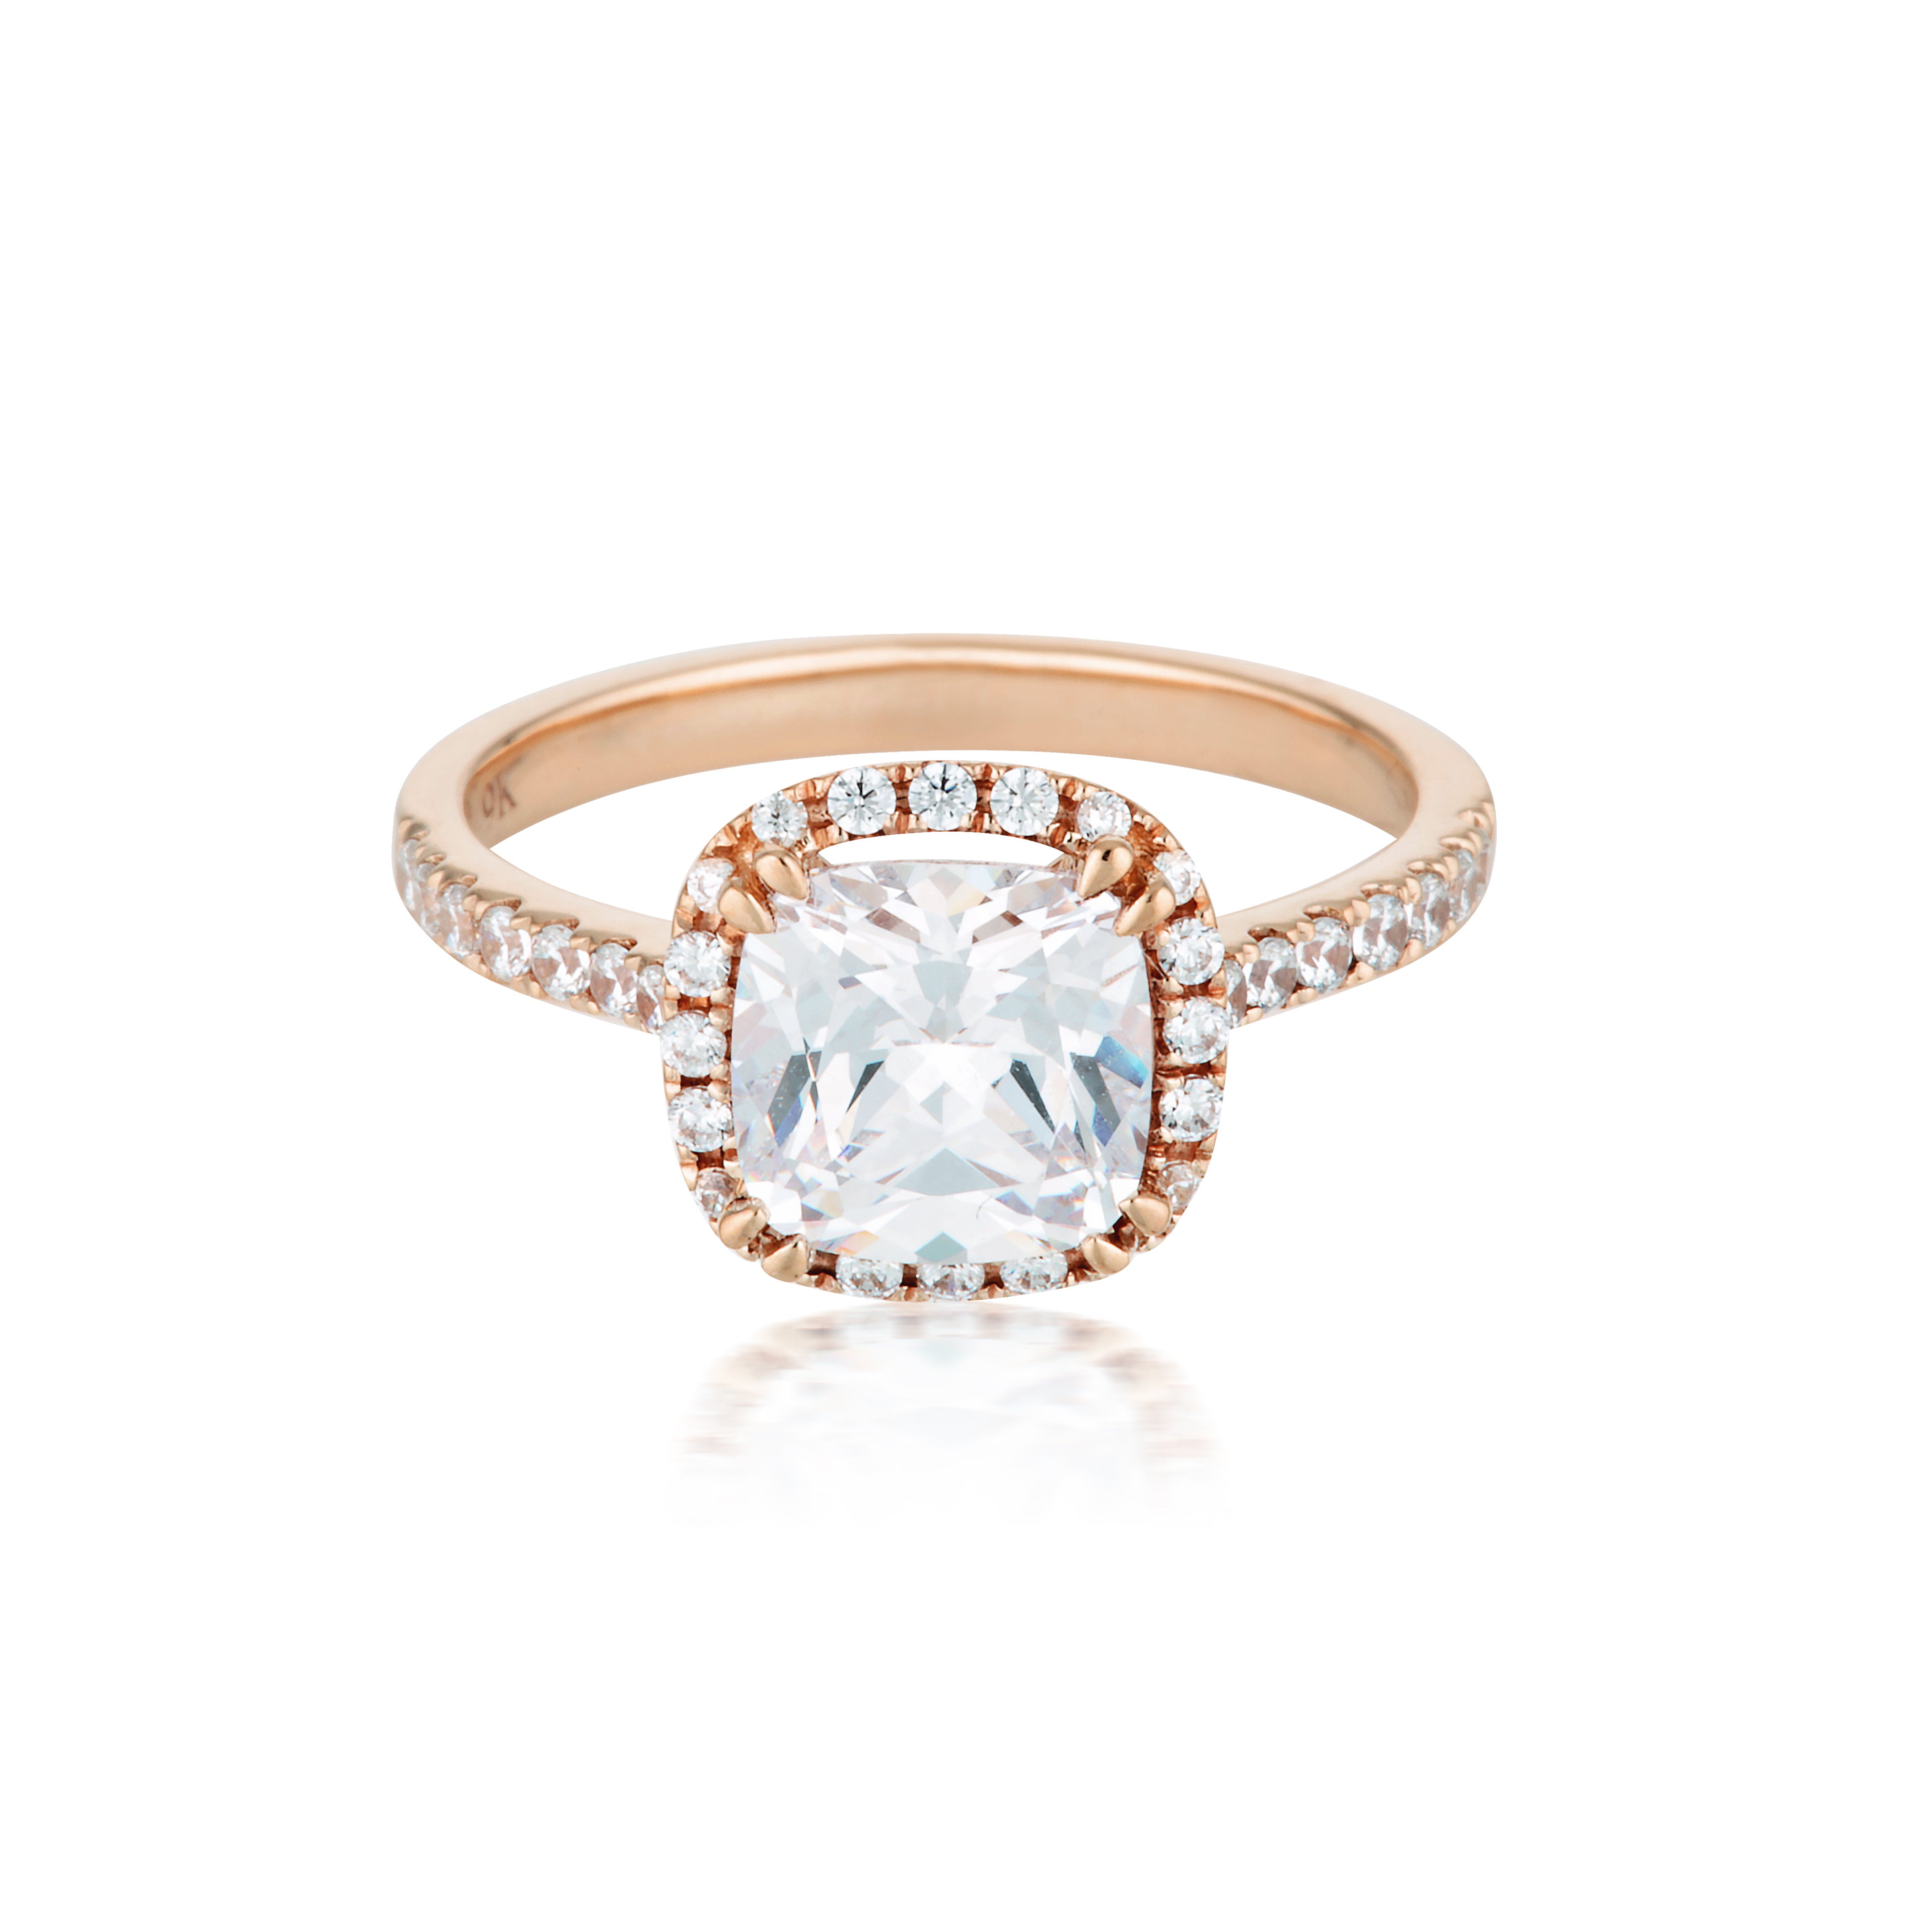 Cushion Cut Halo 1.5tcw Moissanite Engagement Ring in 9ct Rose Gold